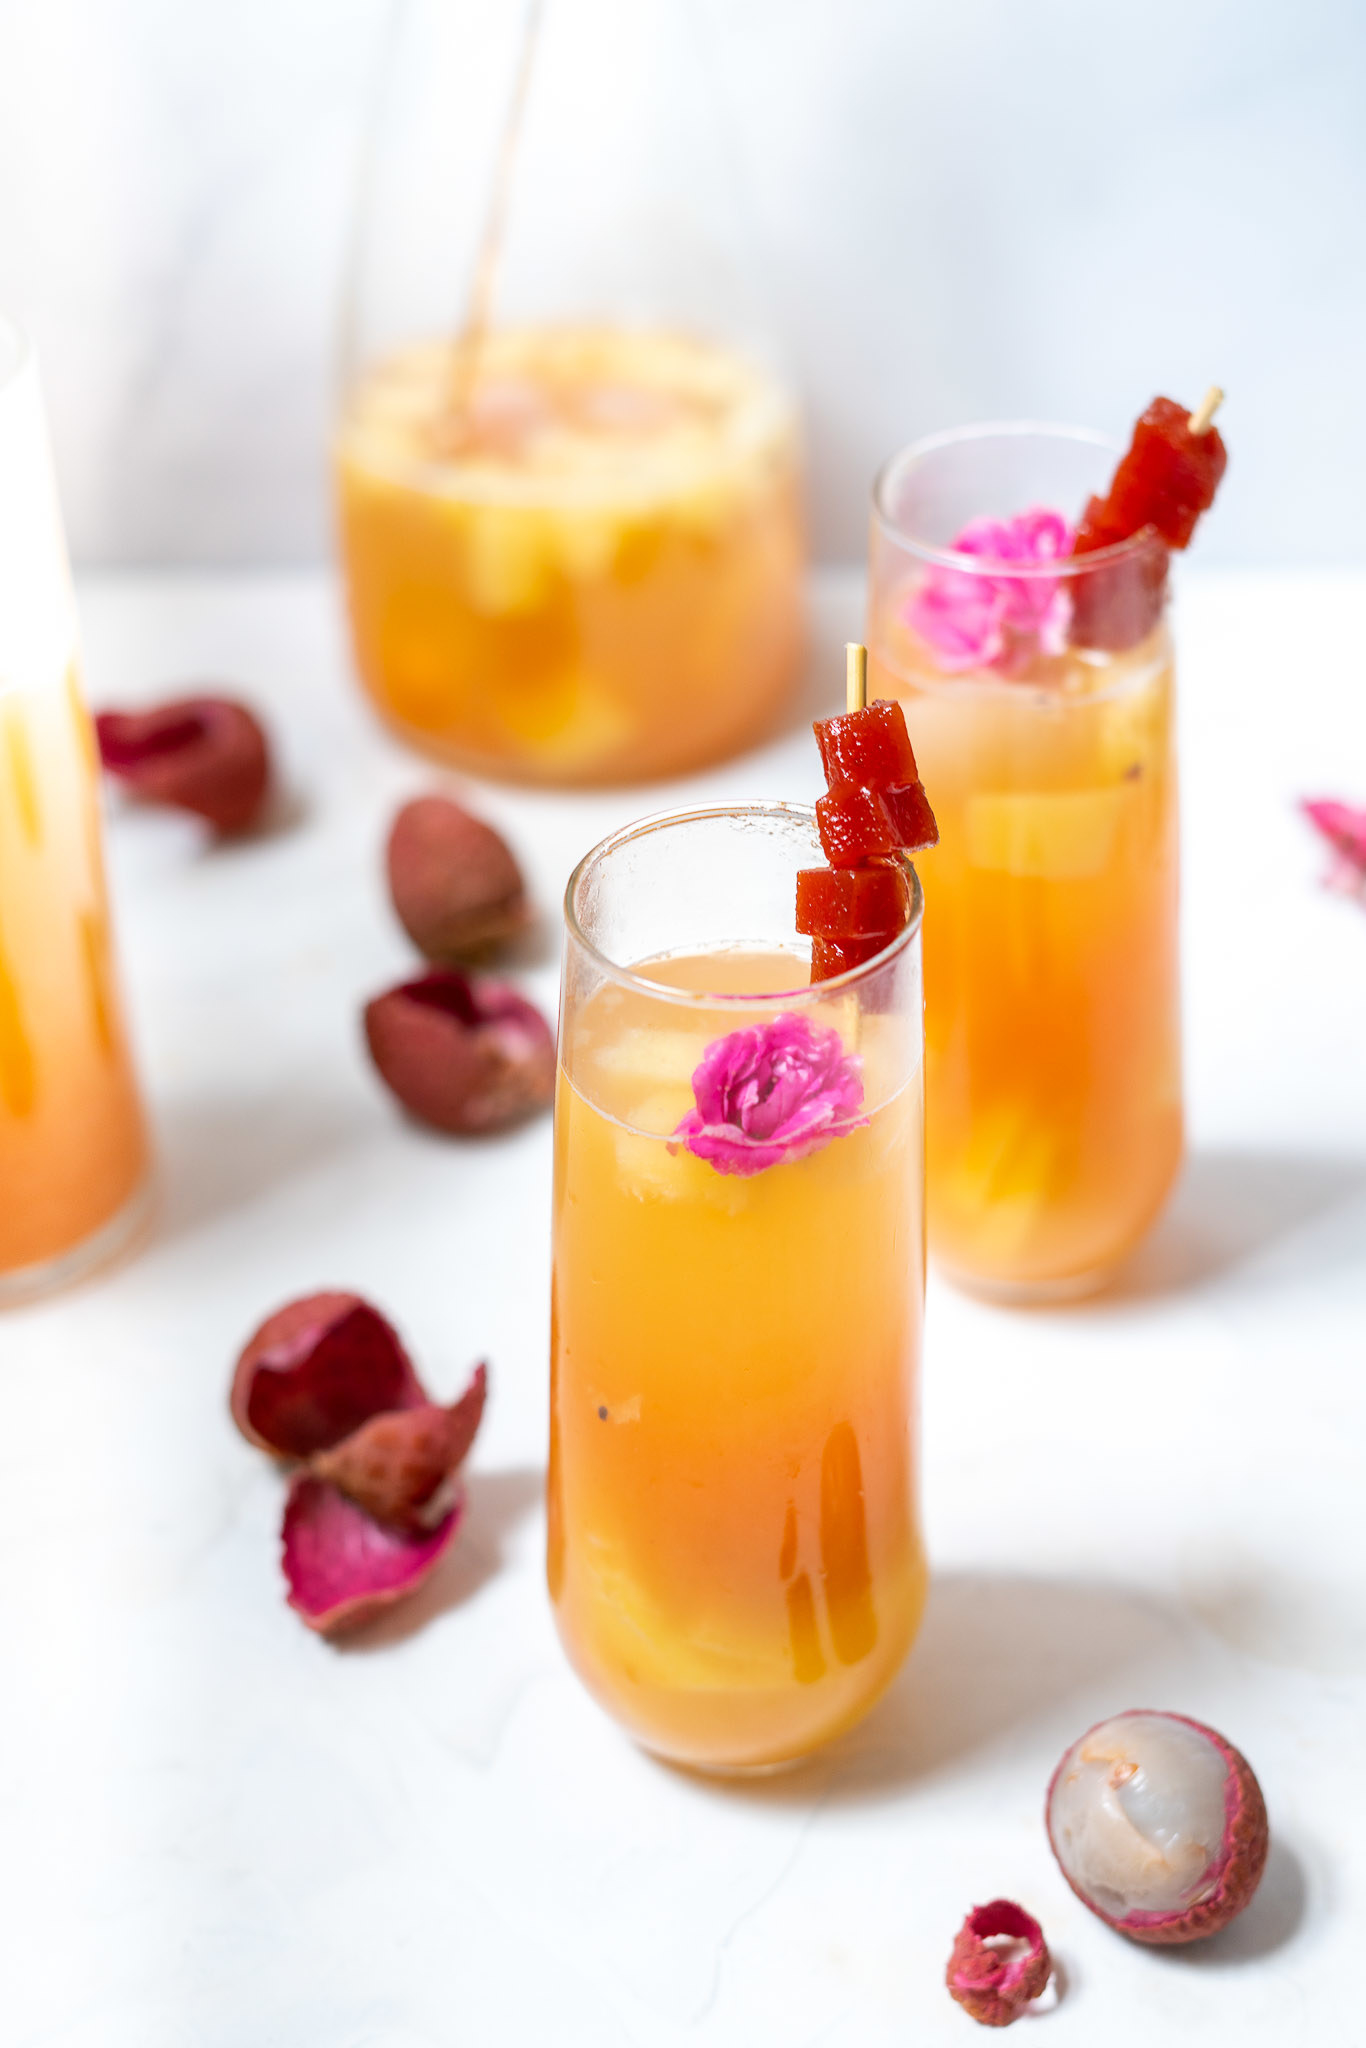 An orange colored cocktail in a stemless cocktail glass garnished with flowers and guava.